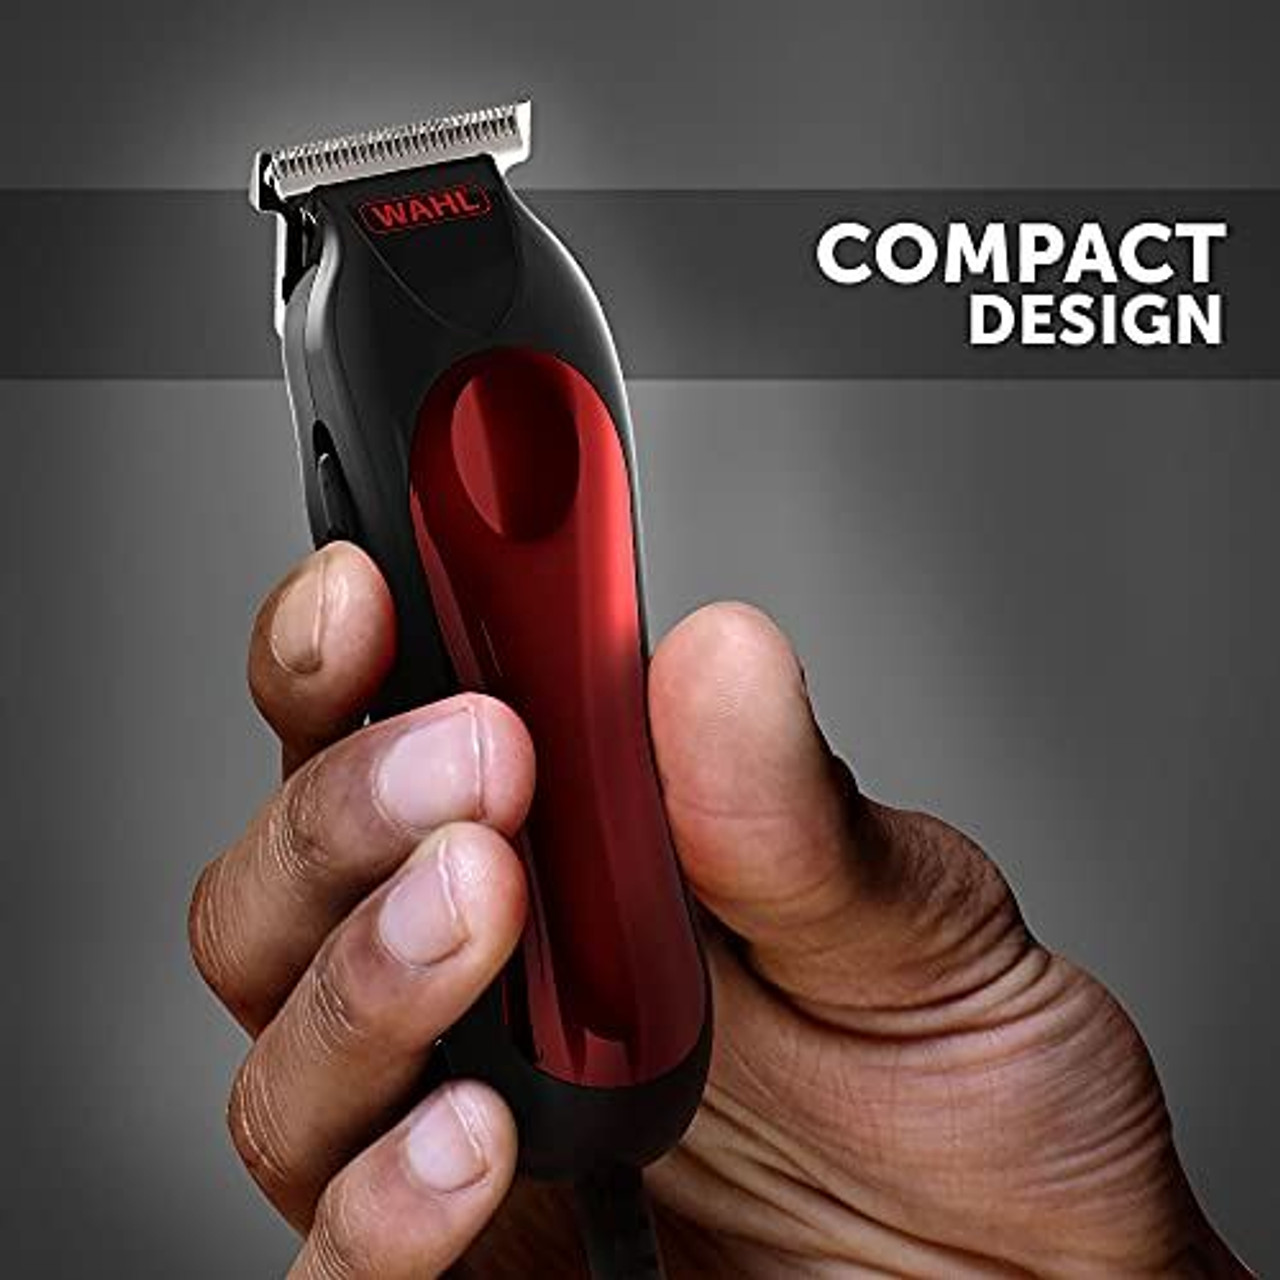 Wahl 9307-5317 T-Pro Corded T-Blade Trimmer with Precision Blades UK Plug